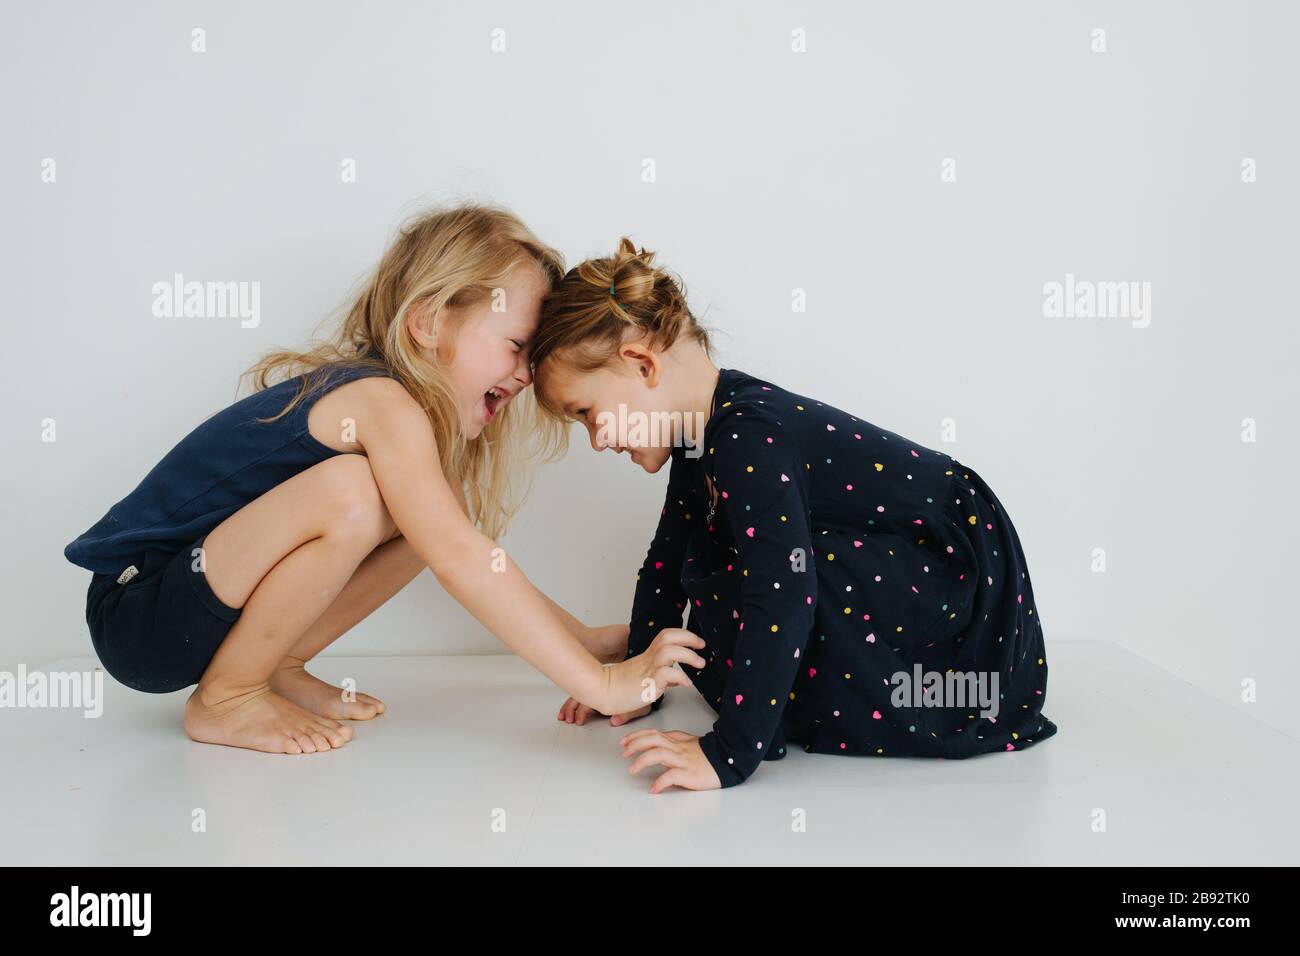 Sibling buried their foreheads at each other Stock Photo